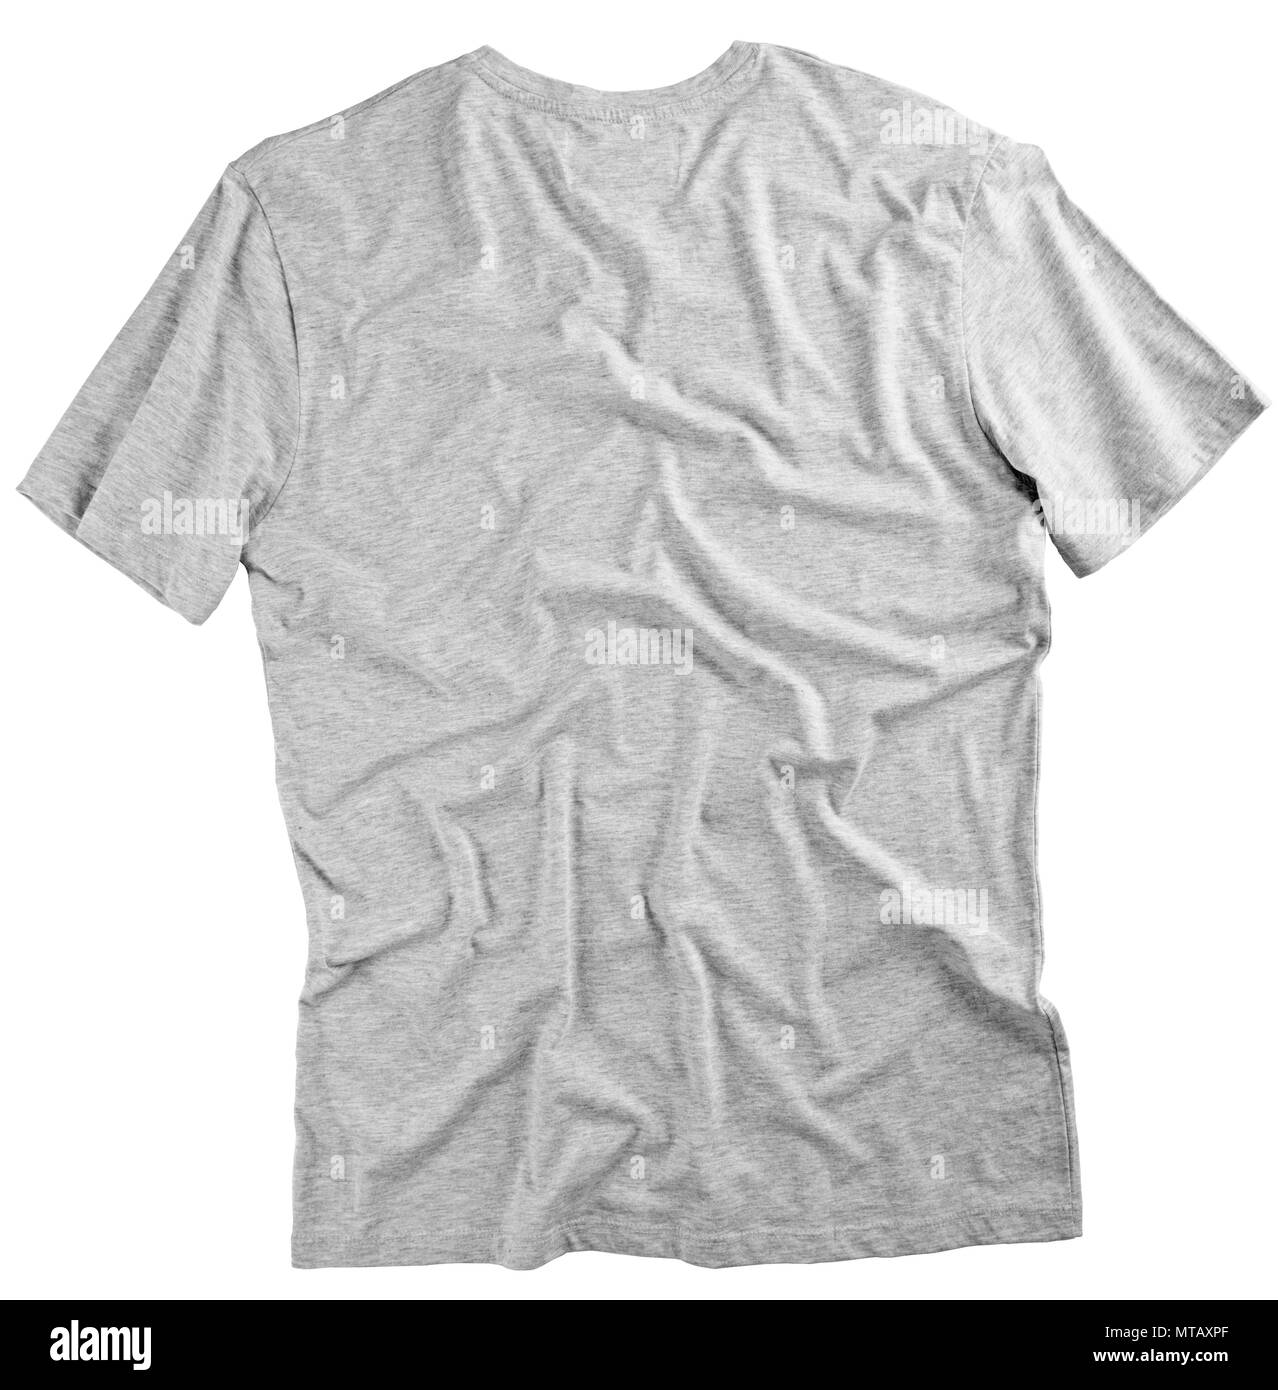 Backl view of grey t-shirt on white background Stock Photo